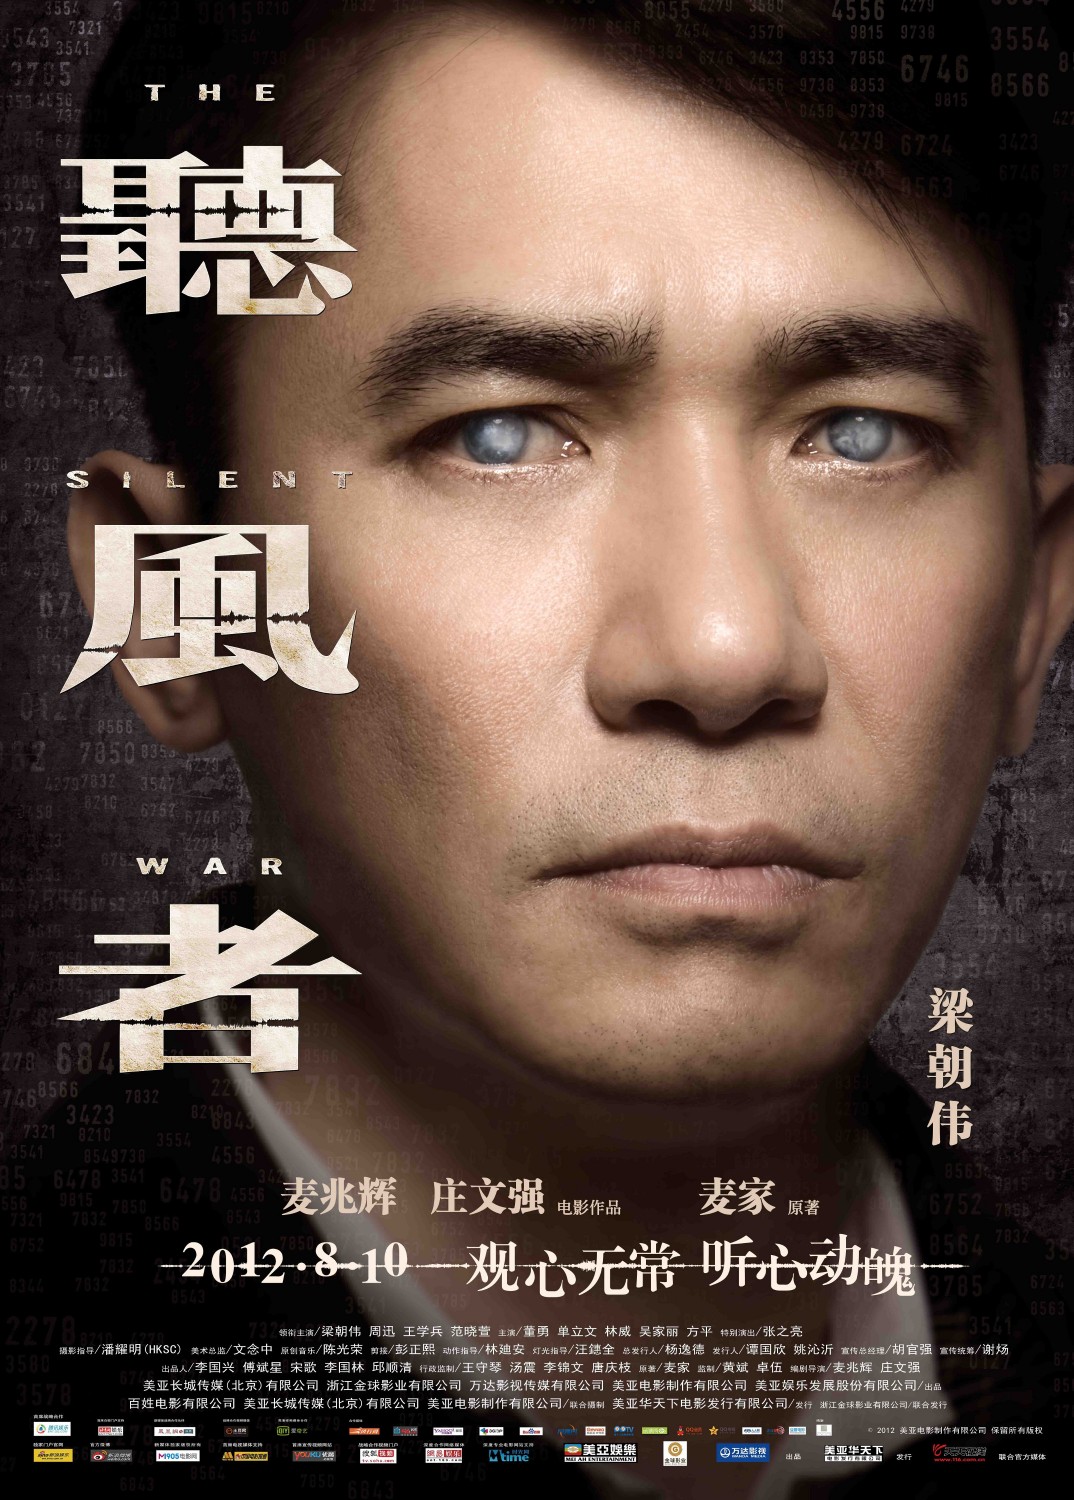 Extra Large Movie Poster Image for Ting feng zhe (#3 of 9)